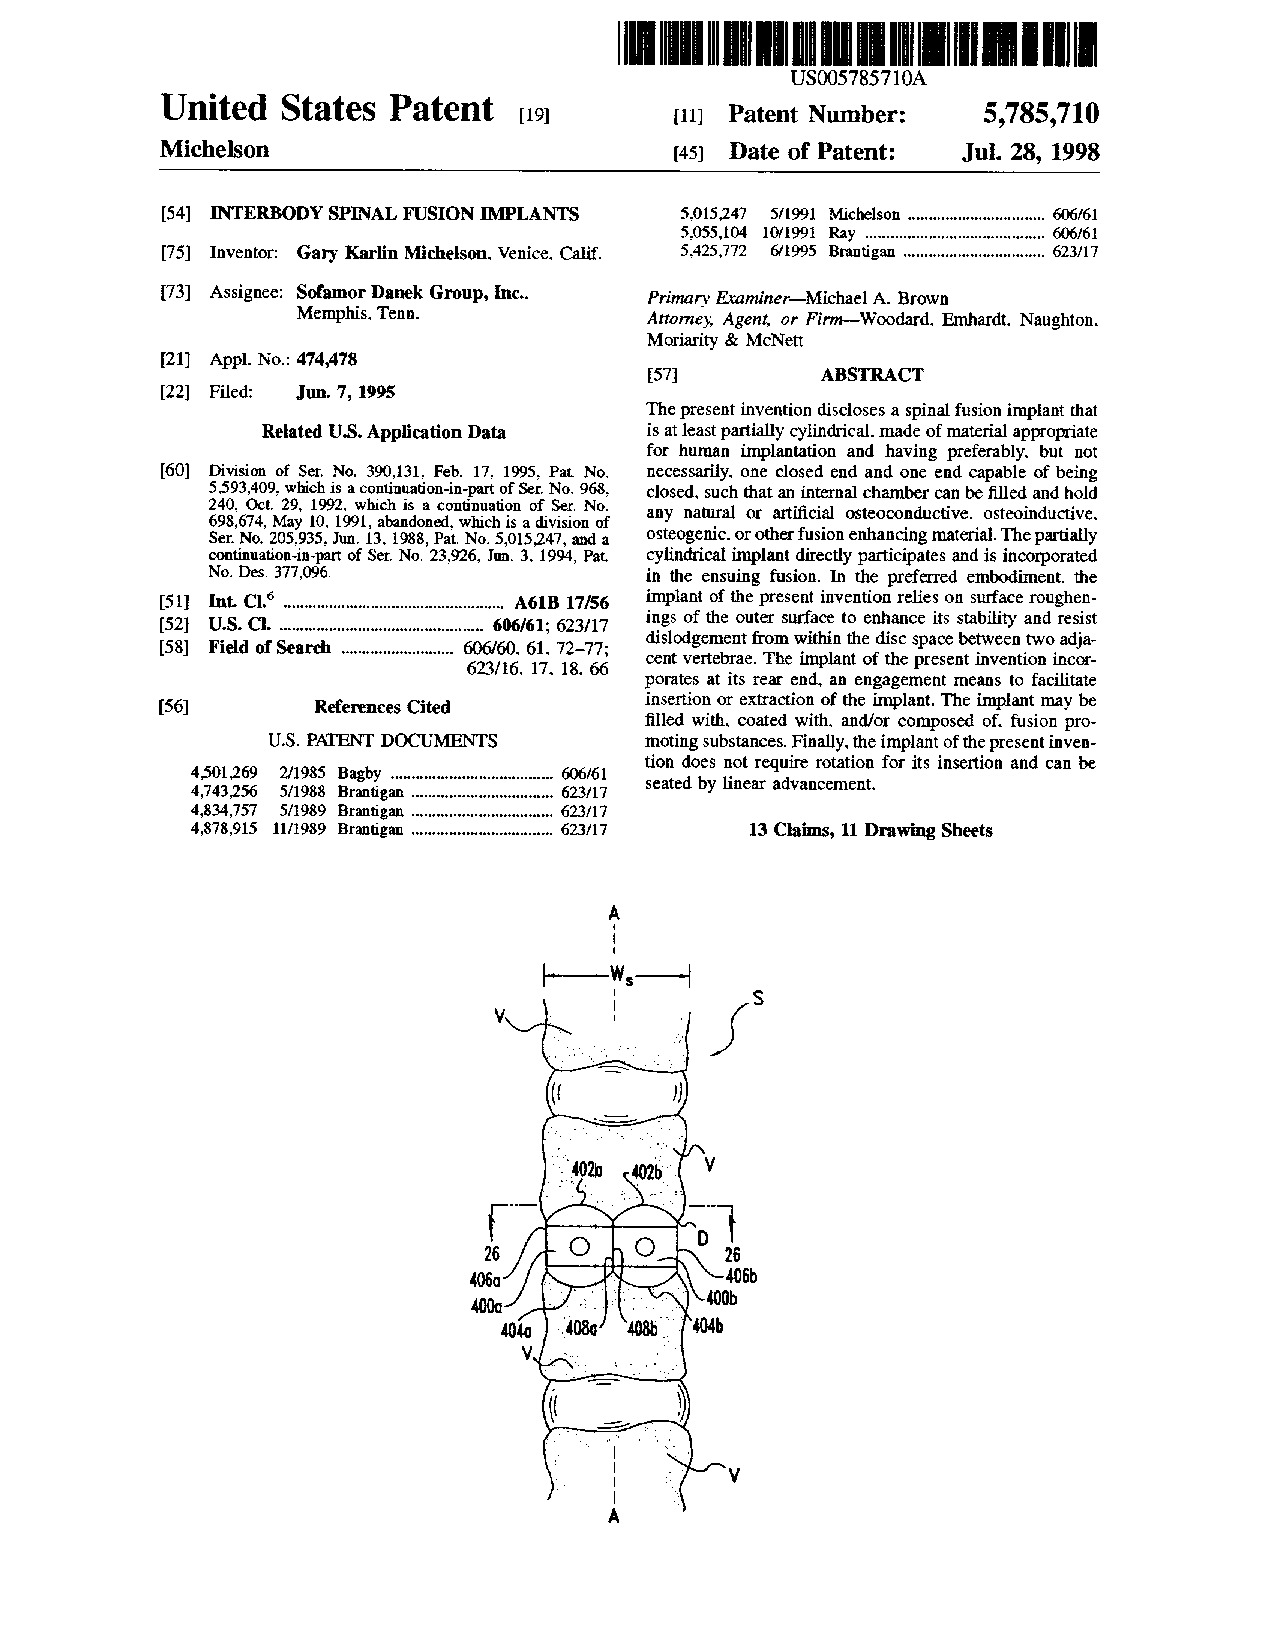 Interbody spinal fusion implants - Patent 5,785,710